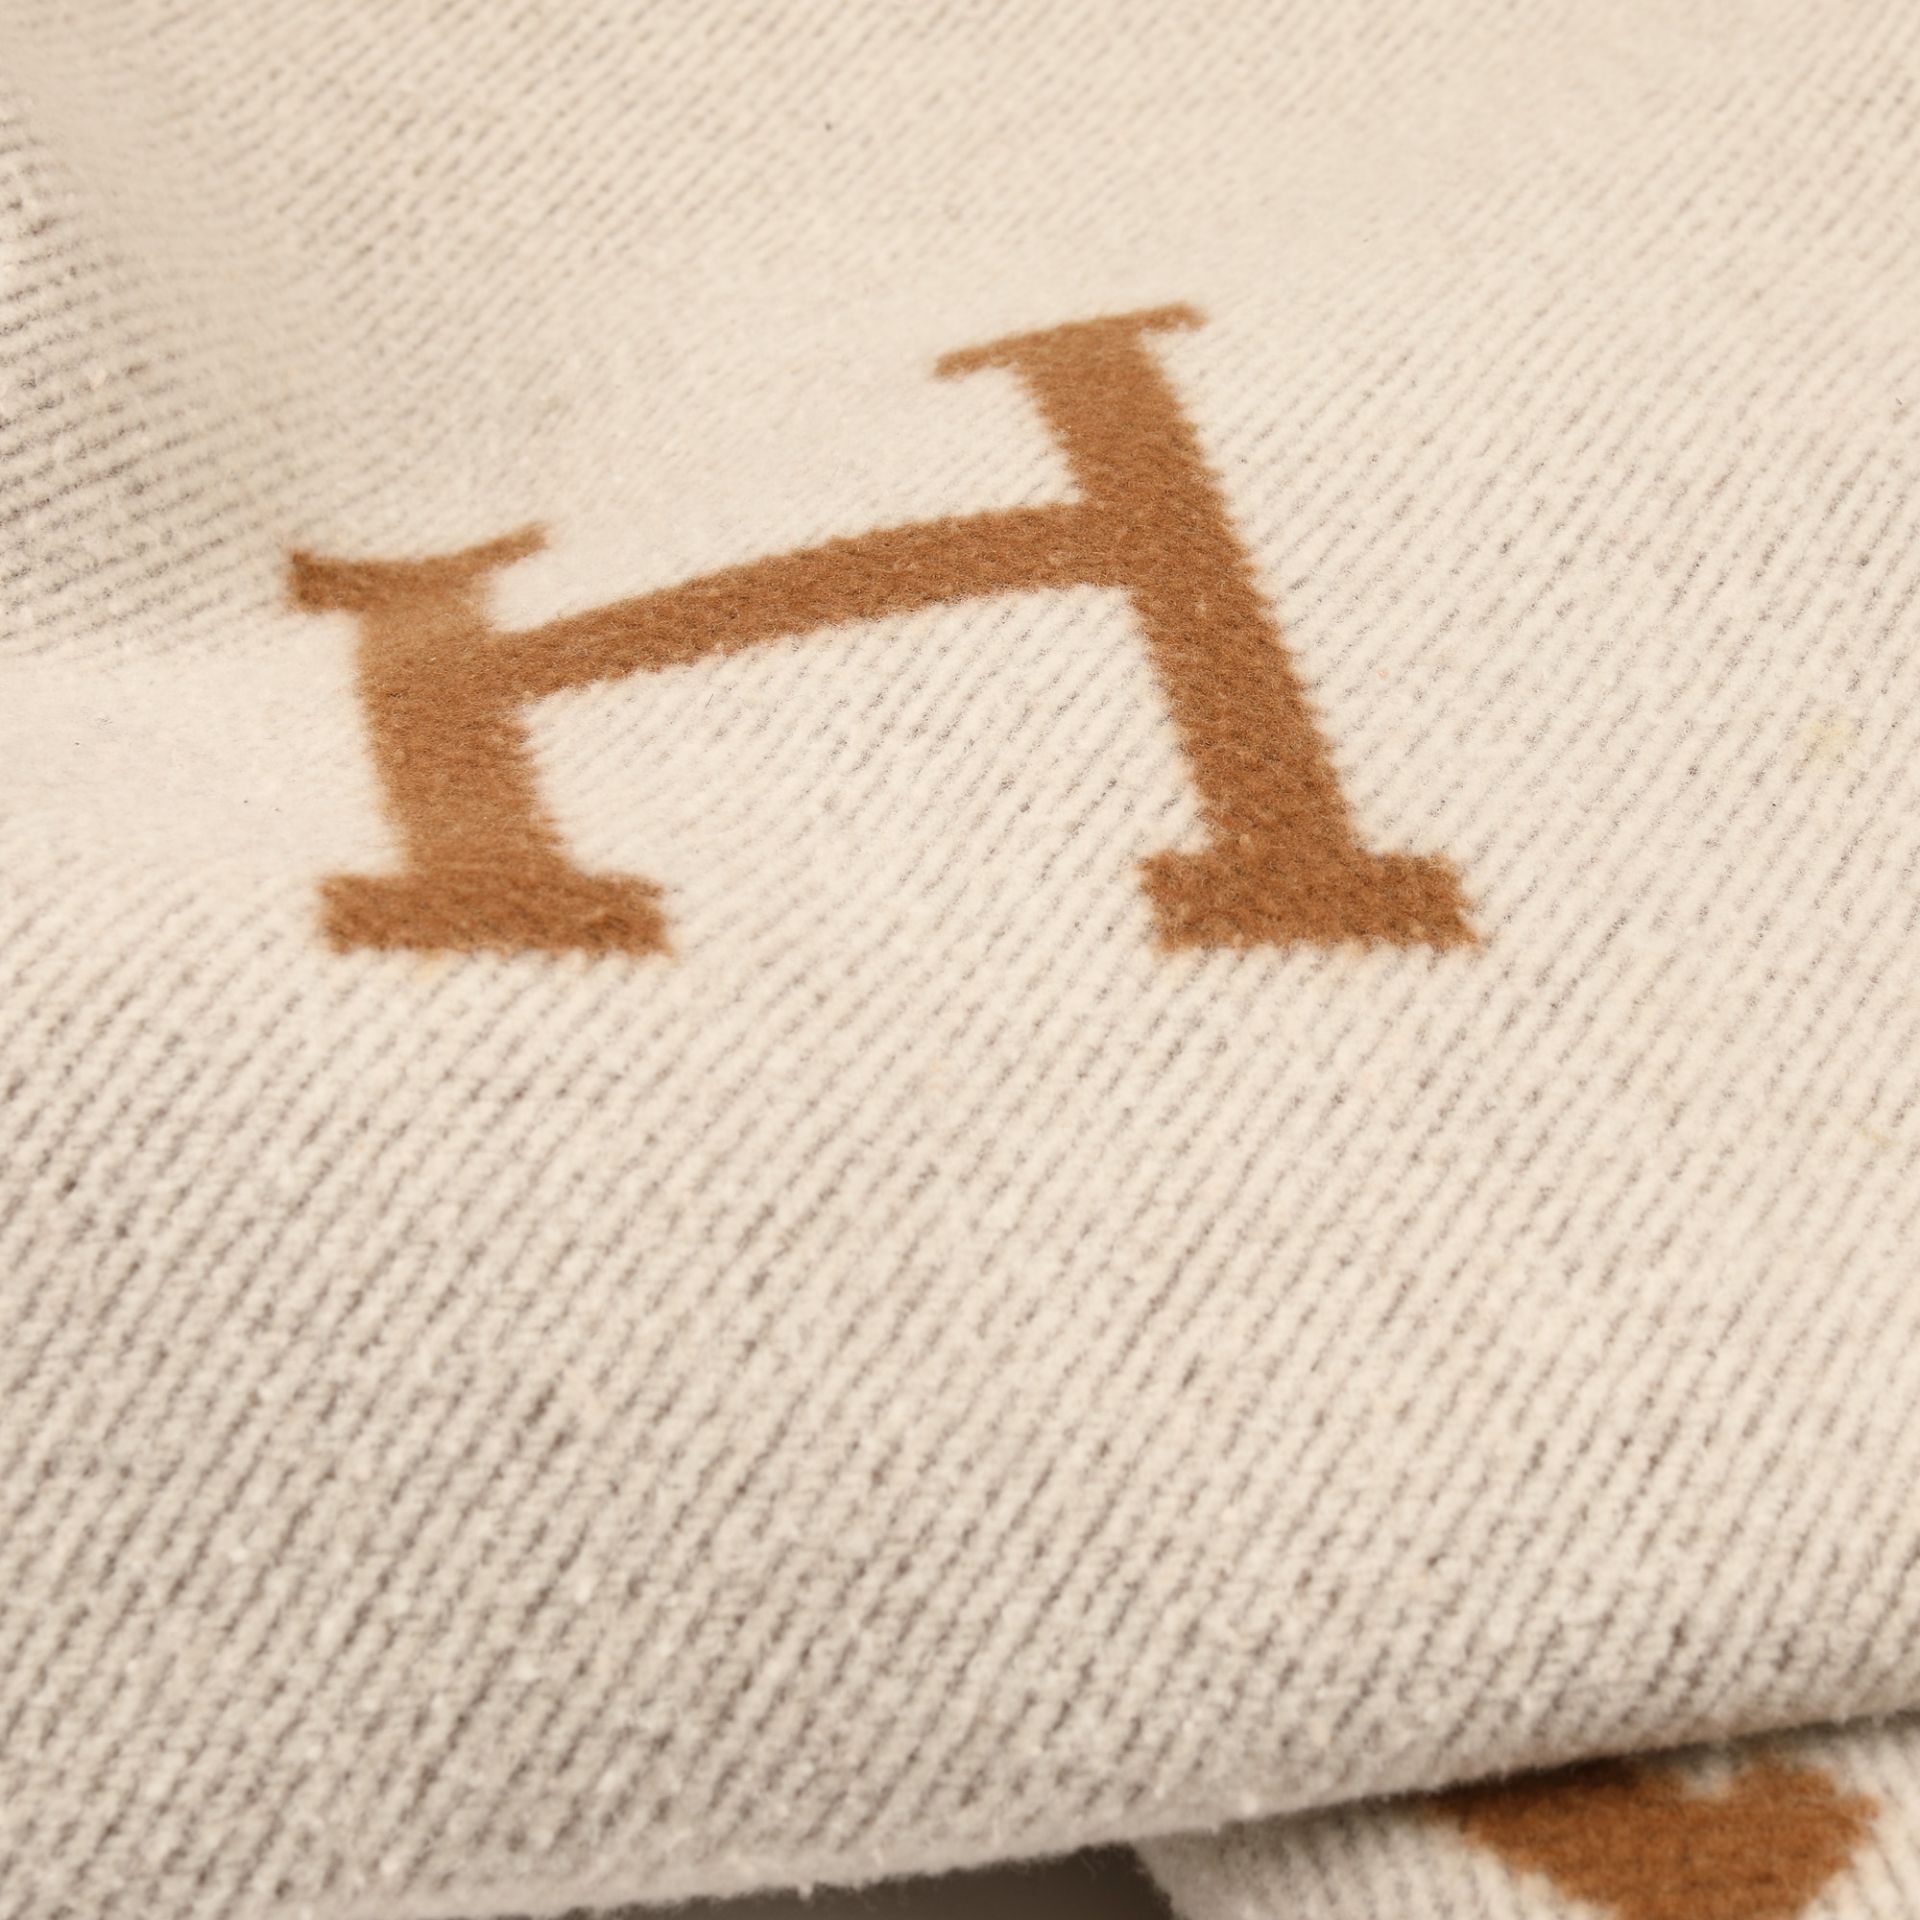 Herm?s set, consisting of a blanket and two pillows, wool and cashmere - Image 2 of 5